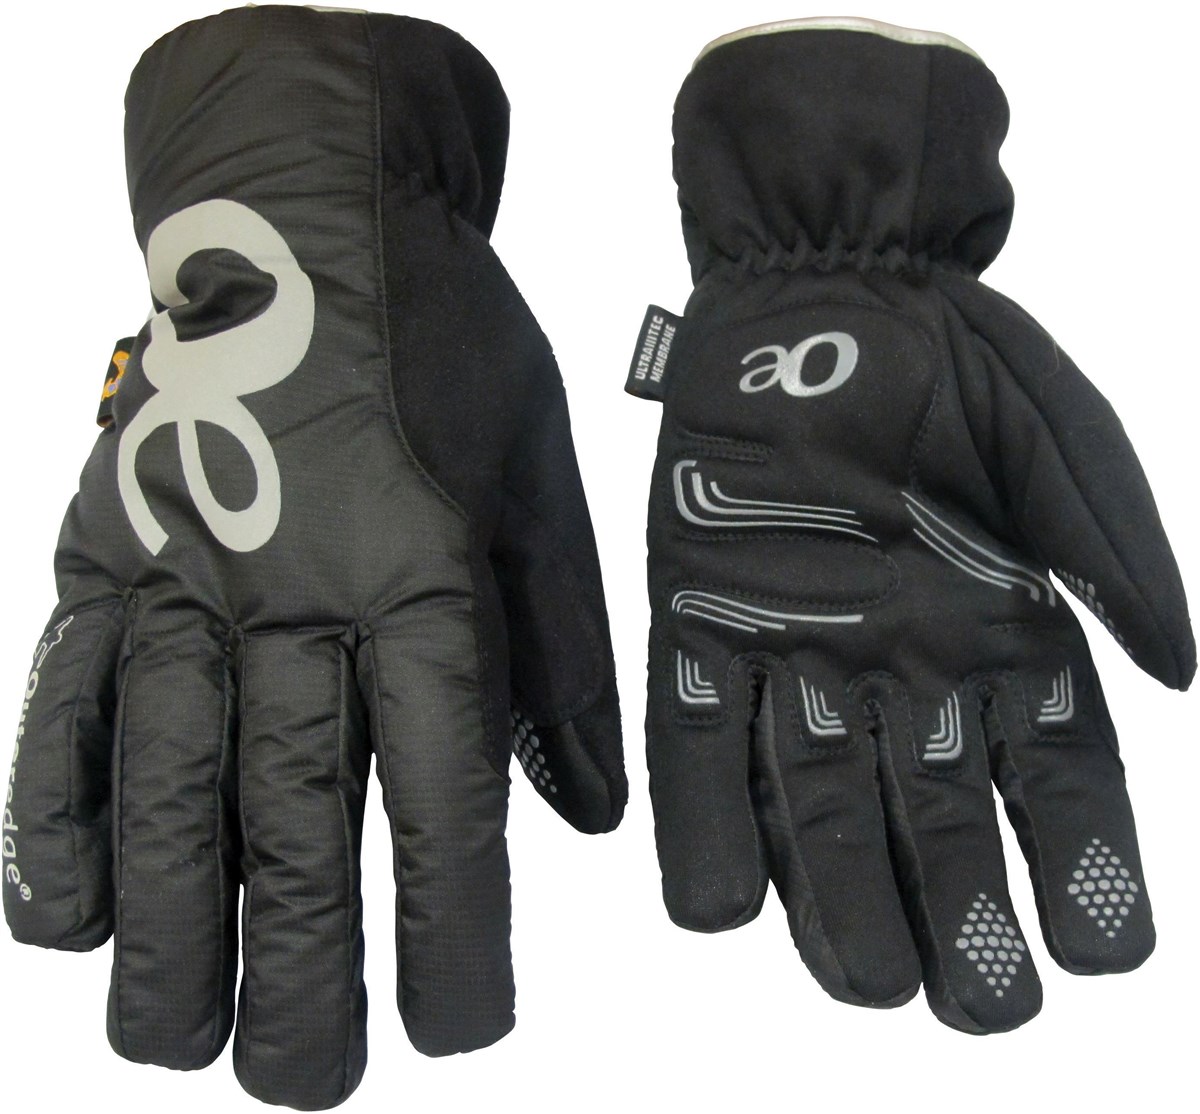 Outeredge Aerotex Winter Reflective Long Finger Gloves product image